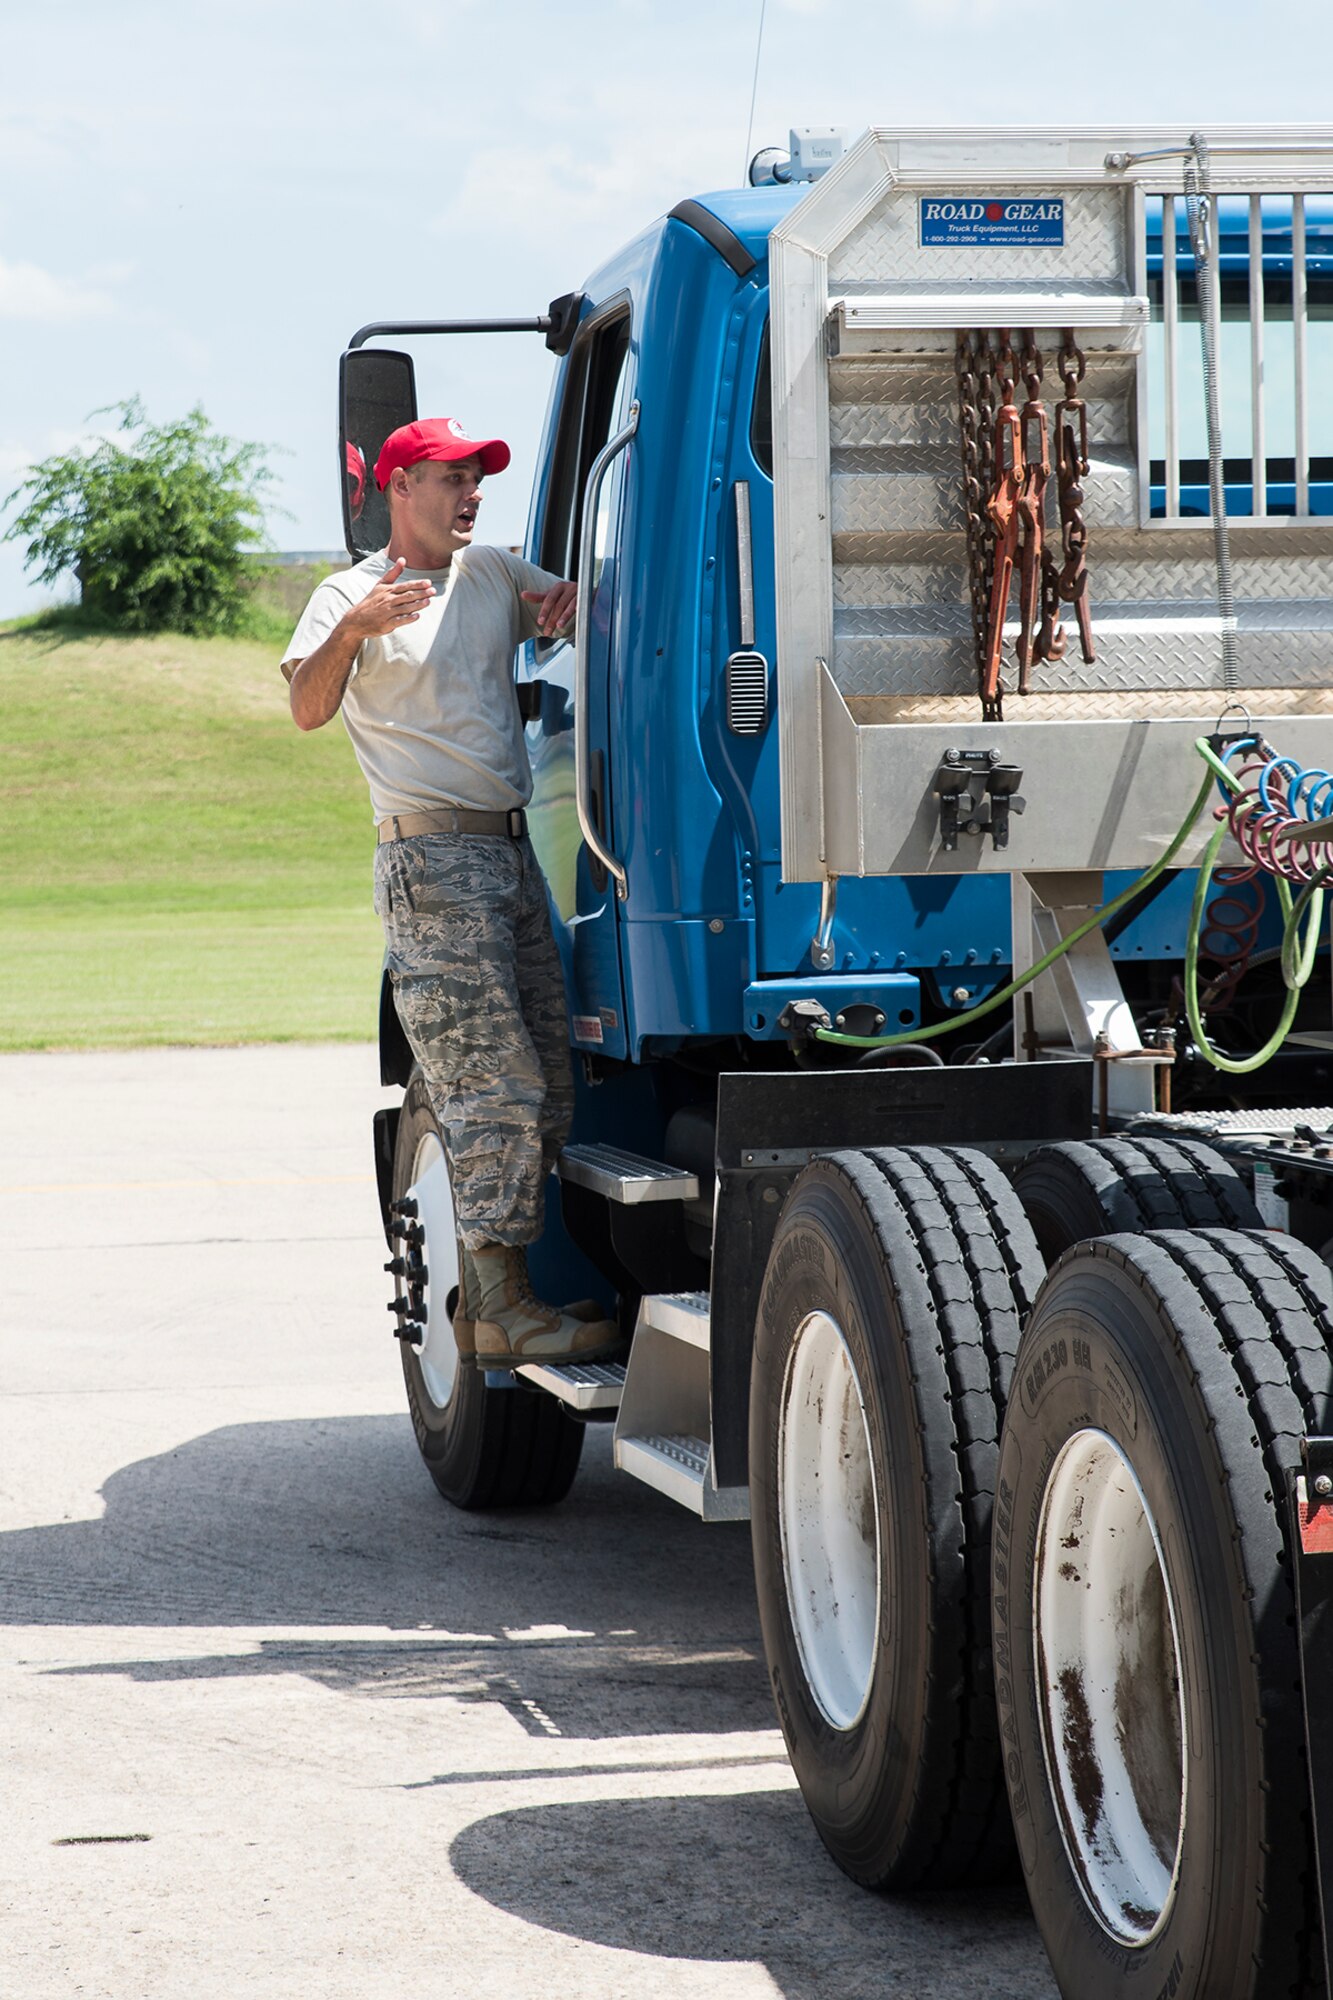 Master Sgt. Bryan Sutton, 188th RED HORSE instructor, offers pointers to a student practicing backing maneuvers on the 3T course at Ebbing ANG Base, Ark., August 29, 2018. The 3T course teaches active, Guard and Reserve Airmen, as well as DOD civilian employees the skills needed to operate tractor-trailers effectively and be able to acquire a military or civilian commercial driver's license. (U.S. Air National Guard photo/Tech. Sgt. John E. Hillier)